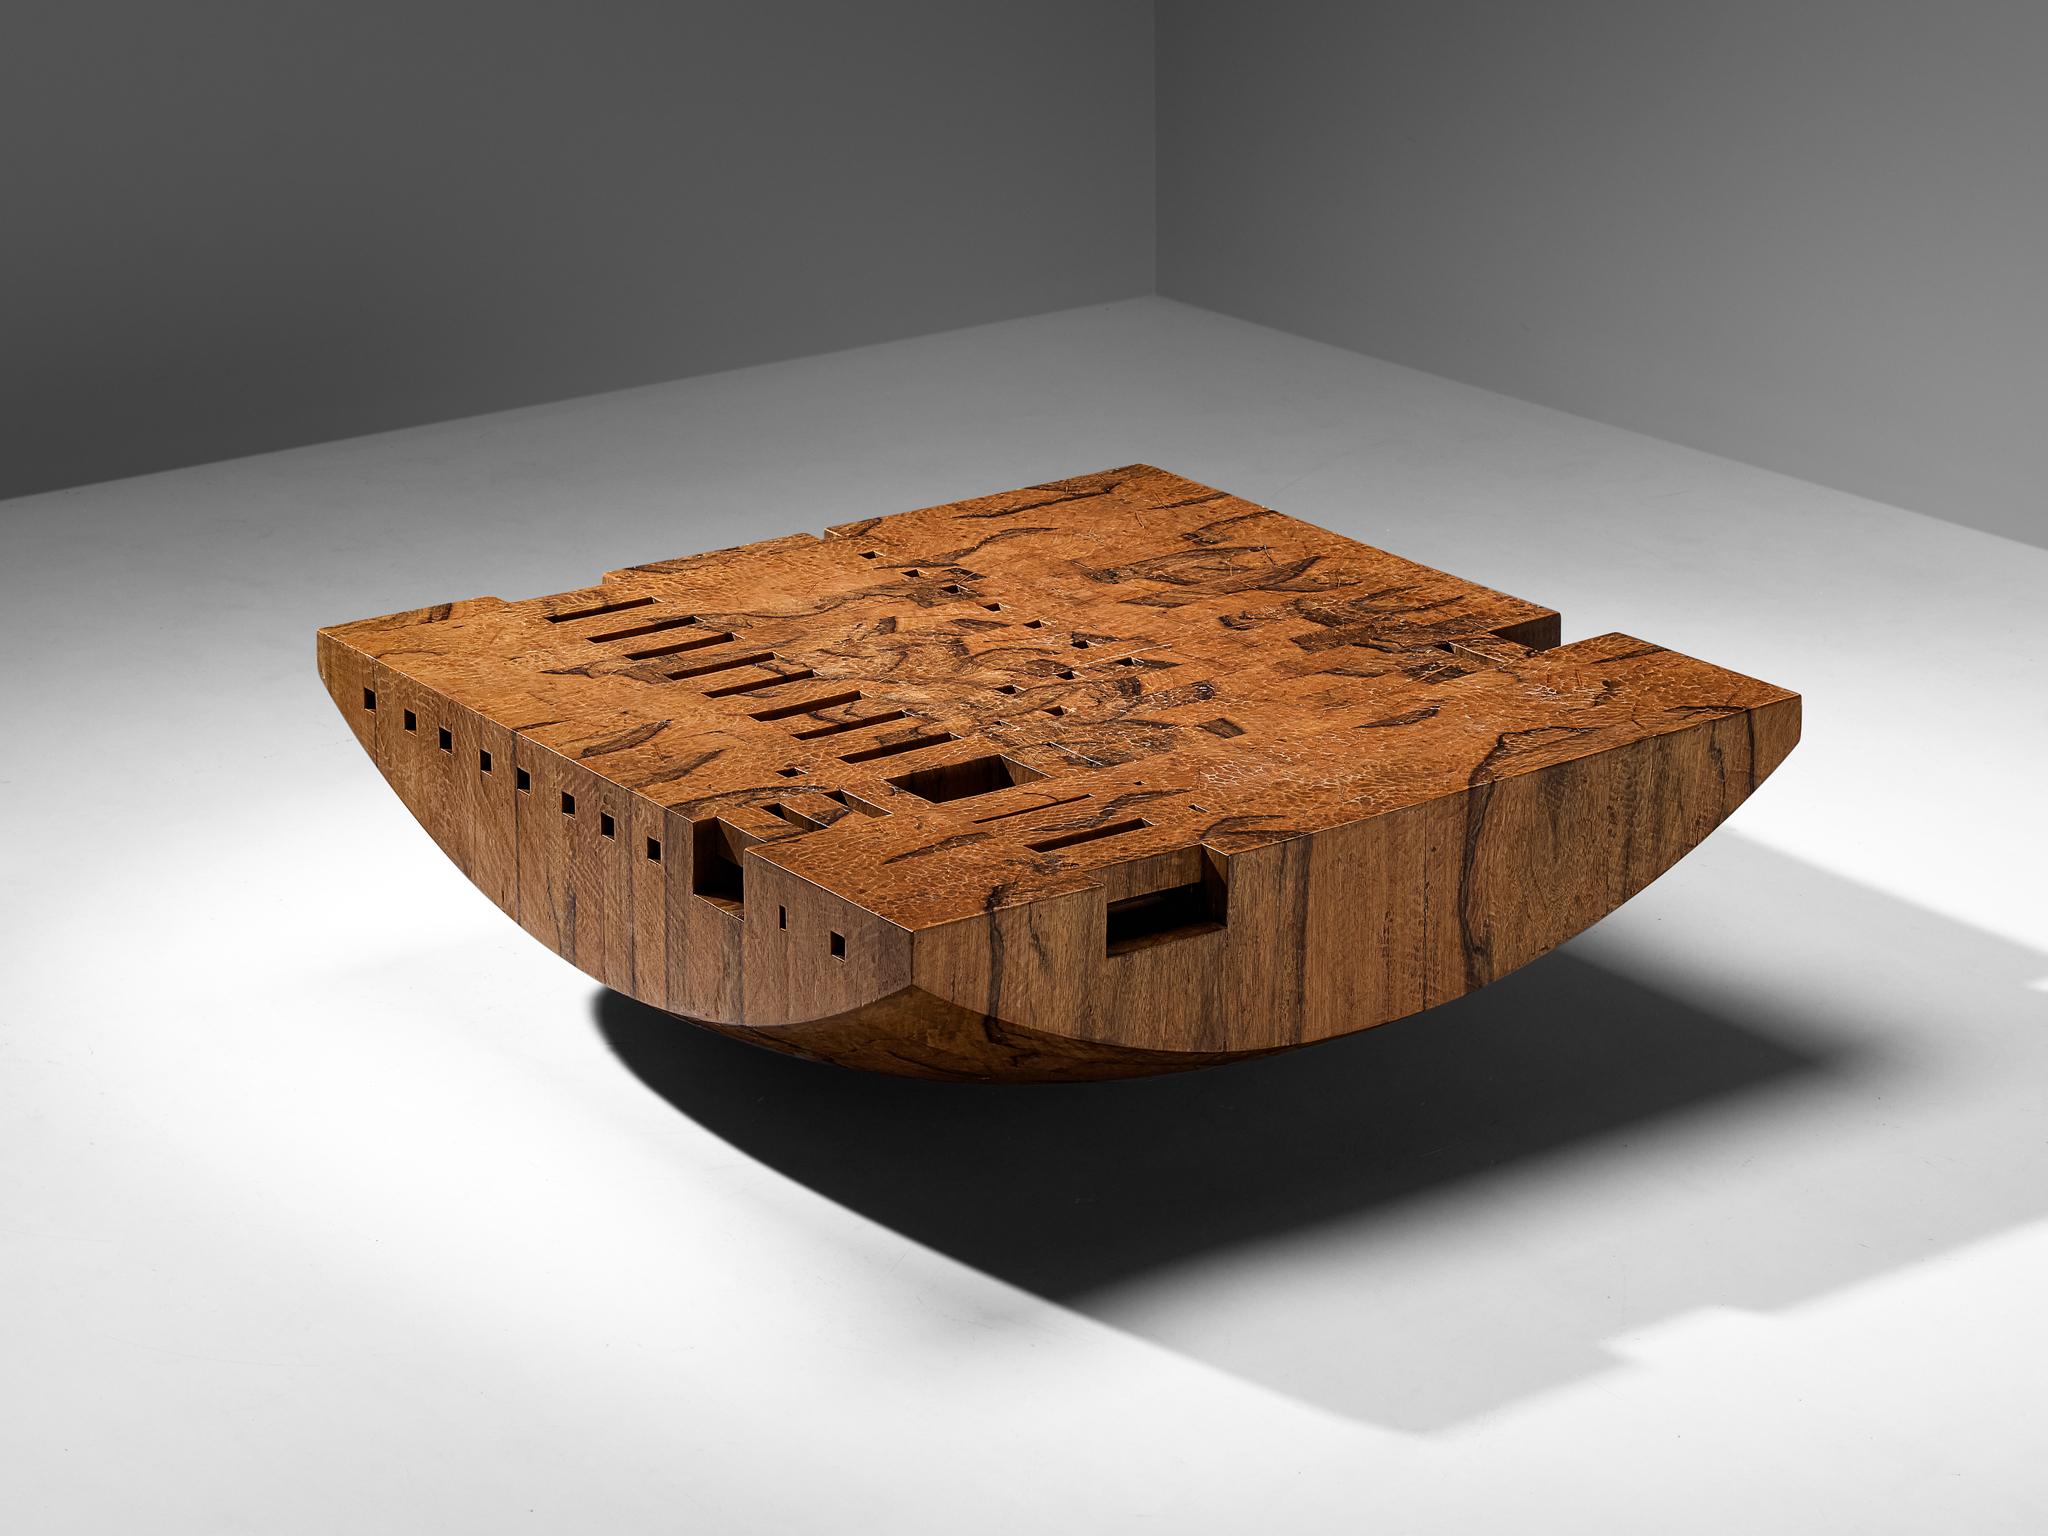 Giuseppe Rivadossi for Officina Rivadossi, 'Blocco Galla' coffee table, walnut, Italy, 1977

This captivating monolithic 'Blocco Galla' coffee table is designed by Giuseppe Rivadossi in 1977. Rivadossi's production of Blocco Galla was so limited